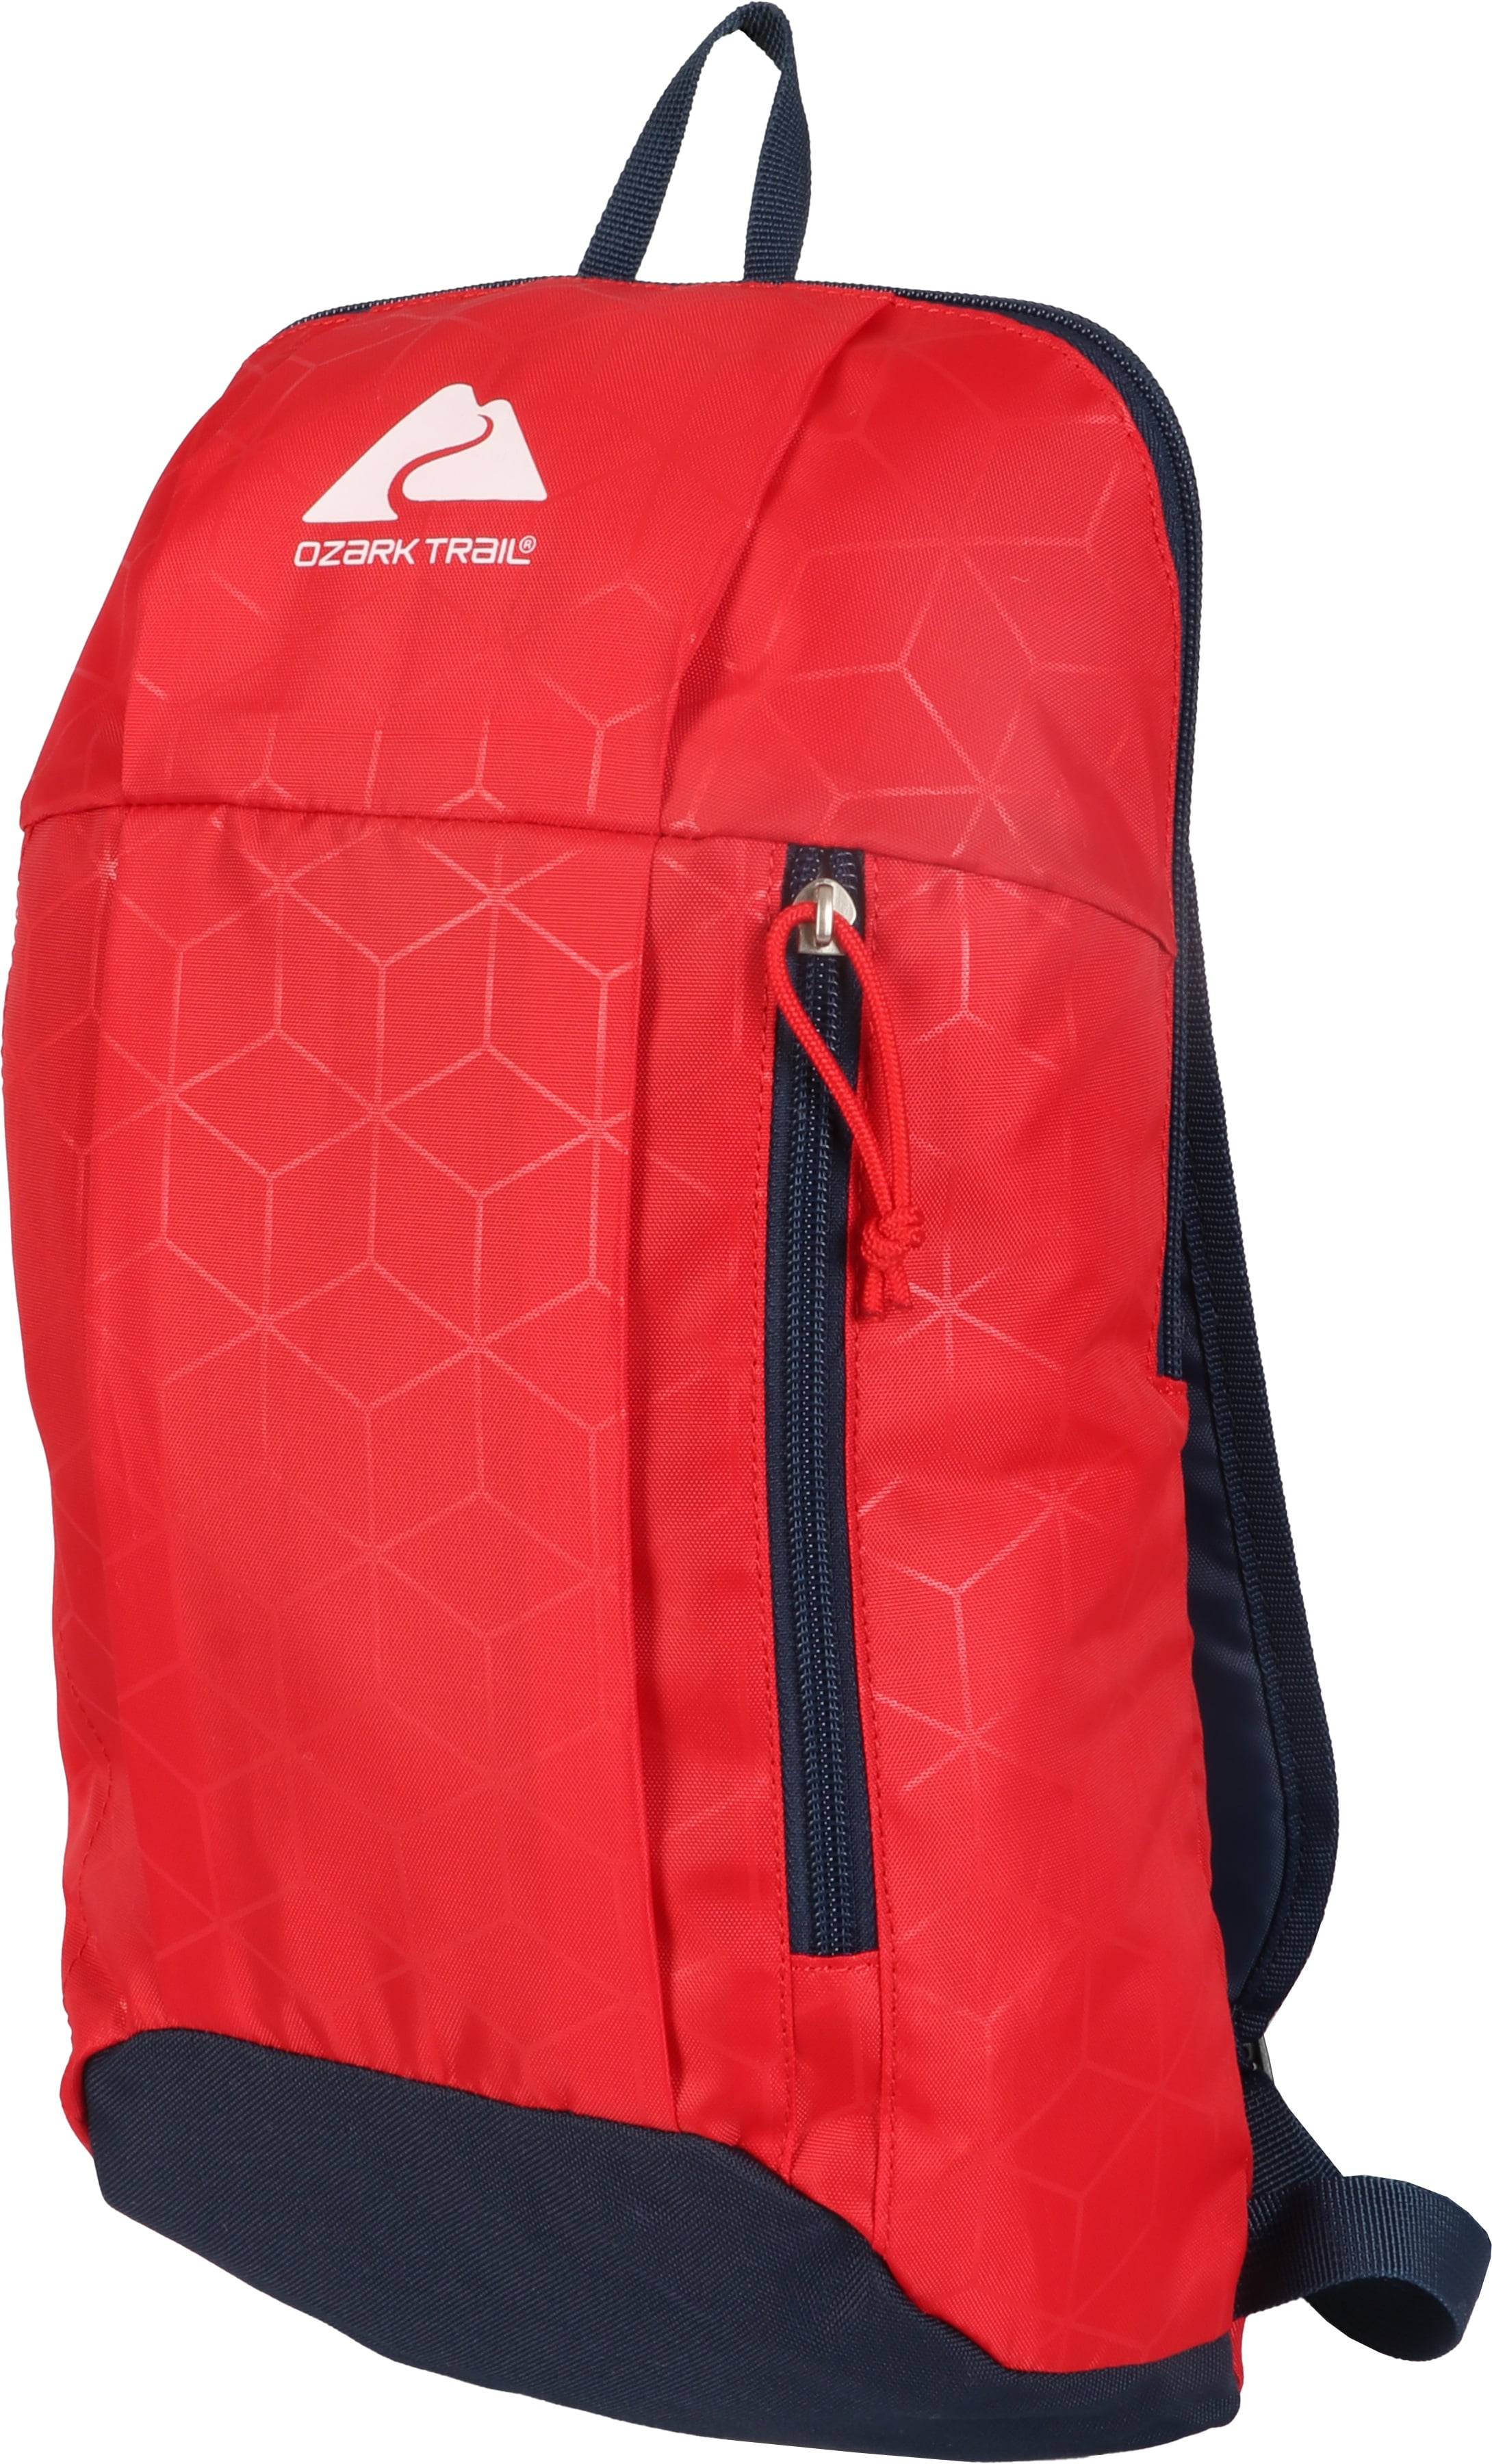 Ozark Trail Adult 10 Liter Backpacking Daypack, Unisex, Blue and Red